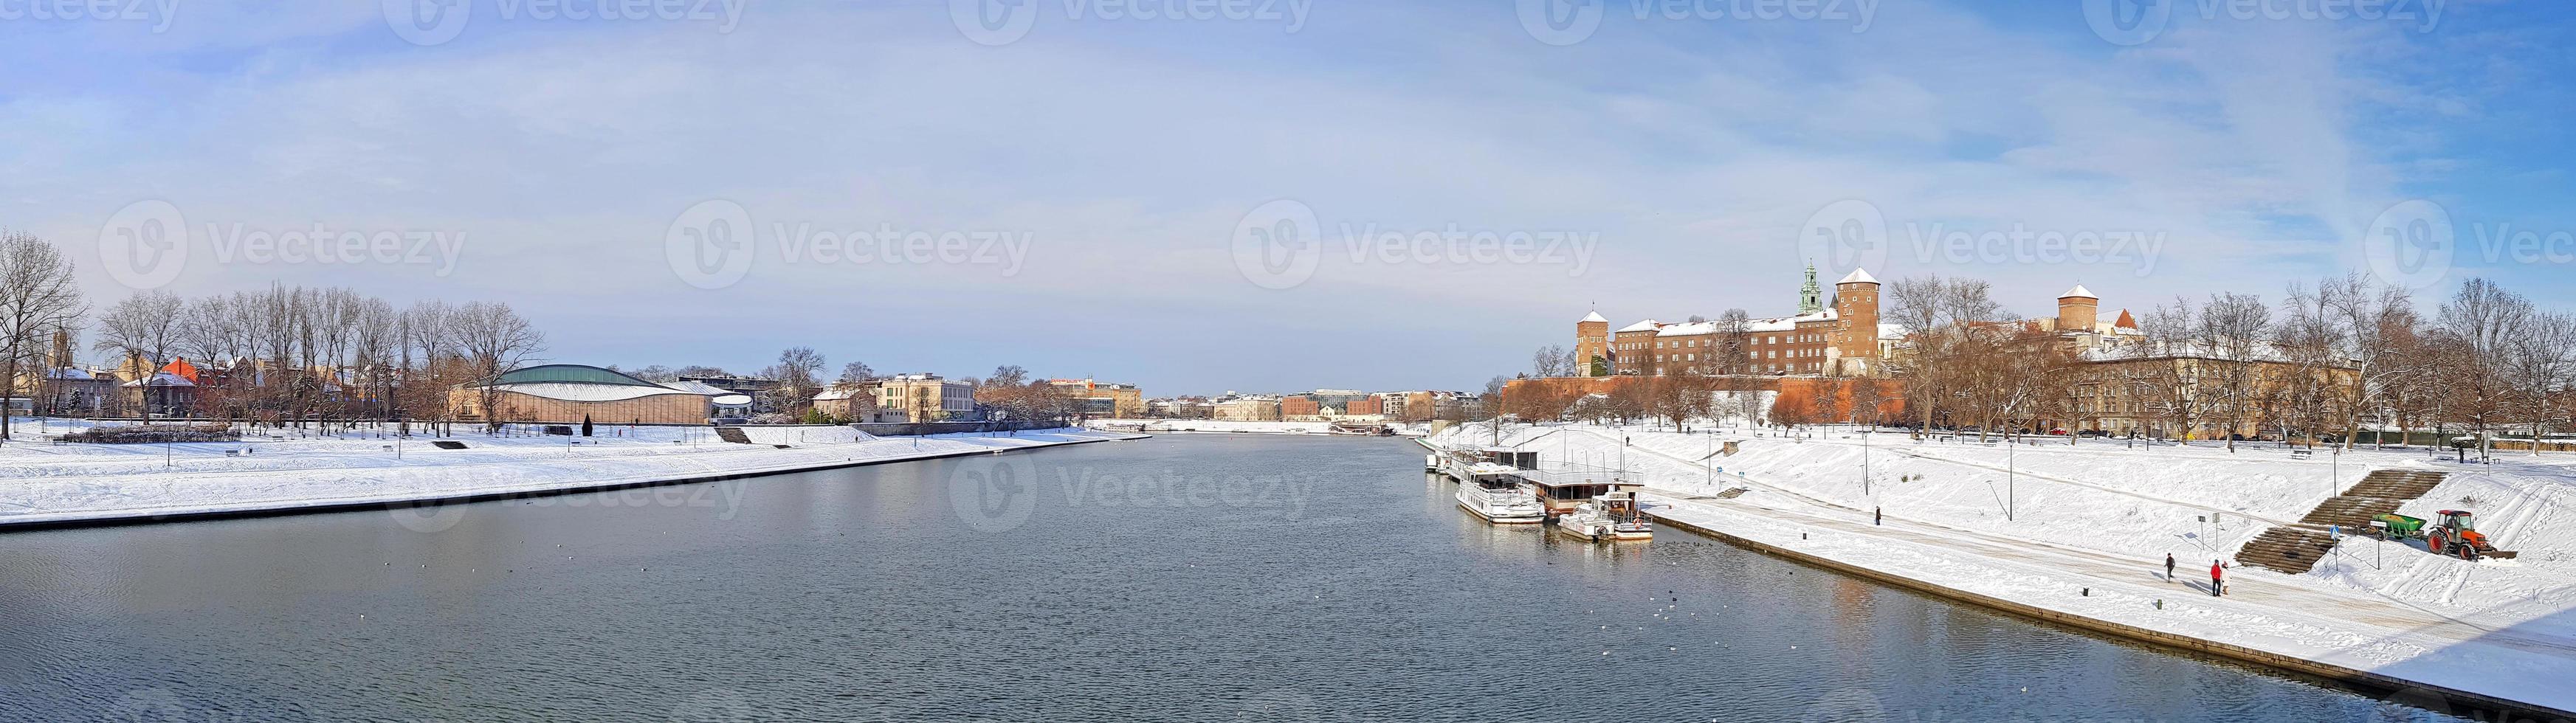 Panoramic Krakow skyline with Manggha Museum of Japanese Art and Technology and The Wawel Royal Castle. View of the Vistula river from Grunwald Bridge. Sunny winter day, blue sky, white clouds. photo